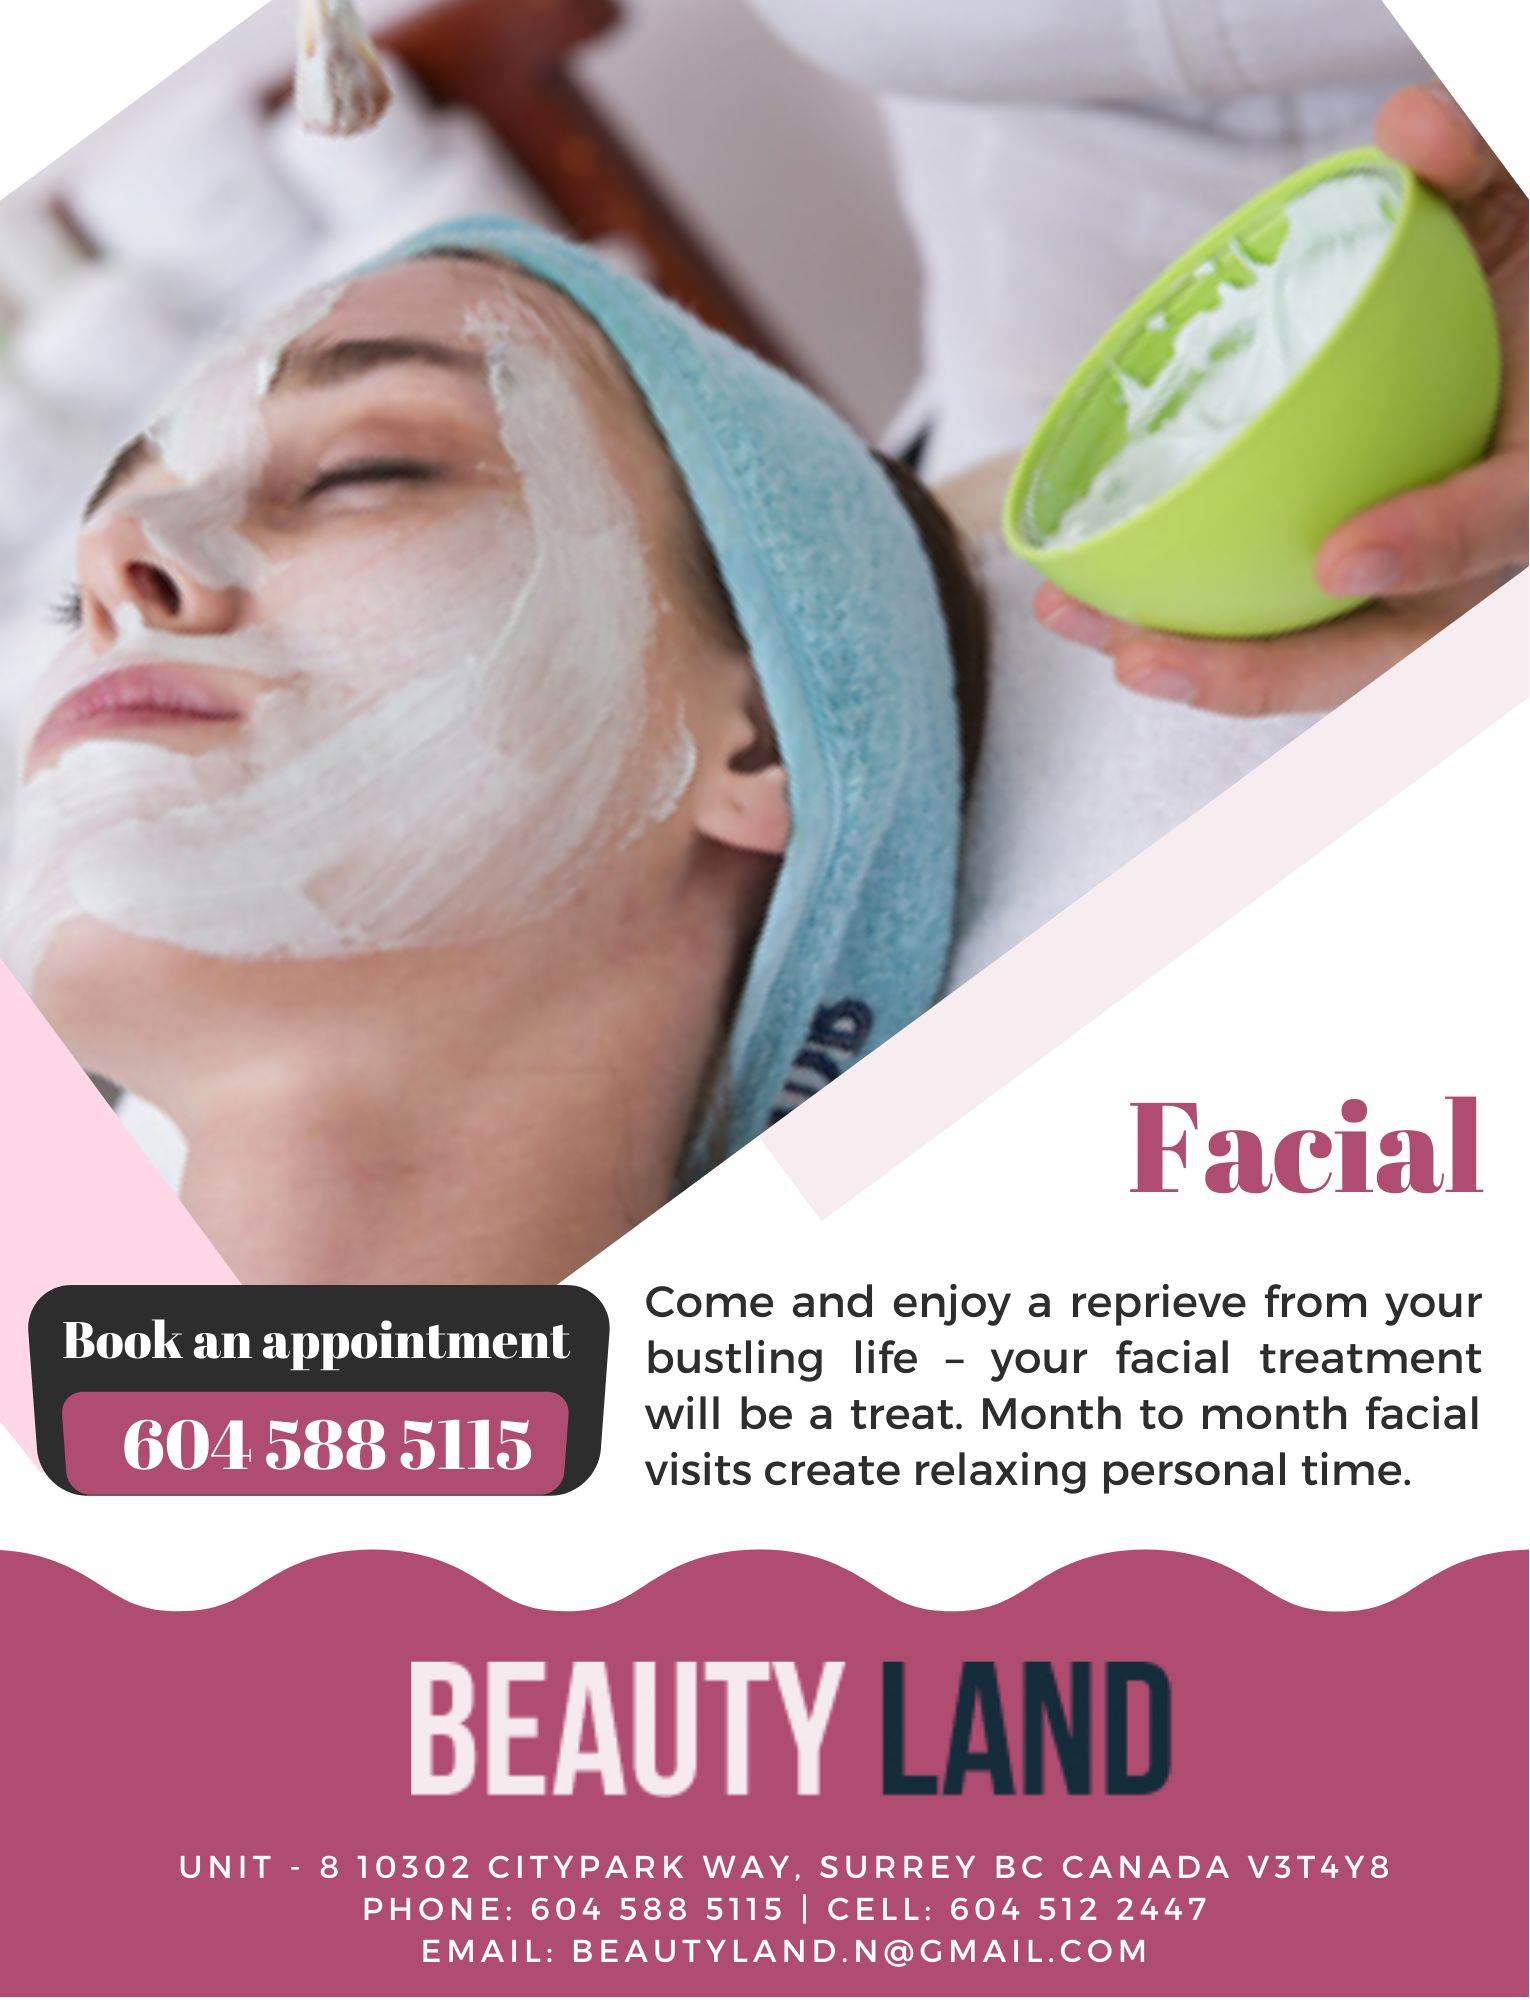 All type of Facials are available at Beauty Land Salon in Surrey, BC